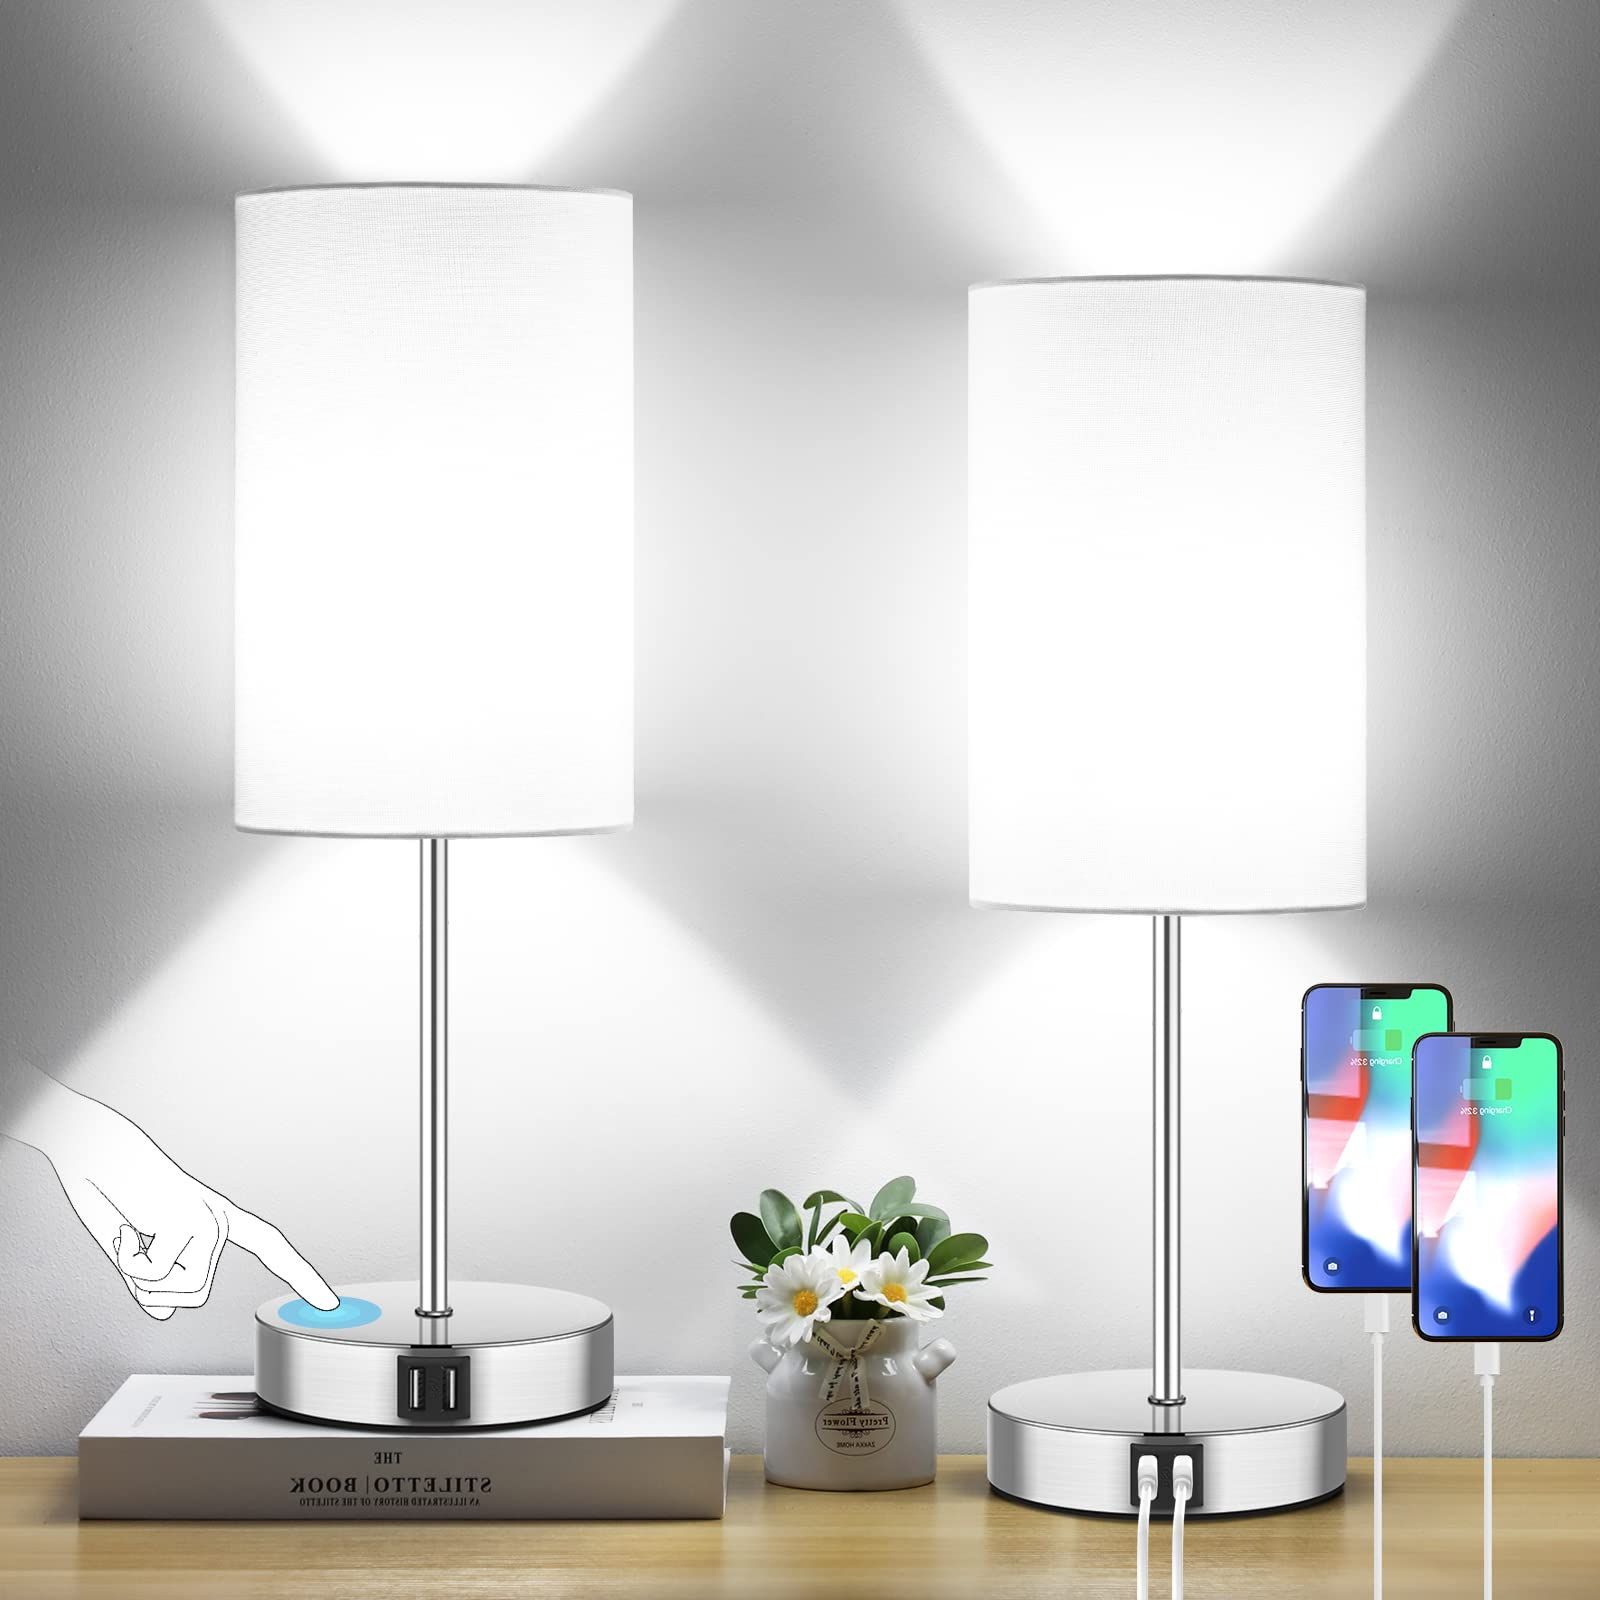 Standing Lamps With Usb Inside Favorite Touch Control Table Lamps Set Of 2, 3 Way Dimmable Modern Nightstand Lamps  With Usb Charging Ports & Ac Outlet, Brushed Nickle Bedside Desk Lamps With  White Shades For Bedroom, 5000k Led (View 9 of 10)